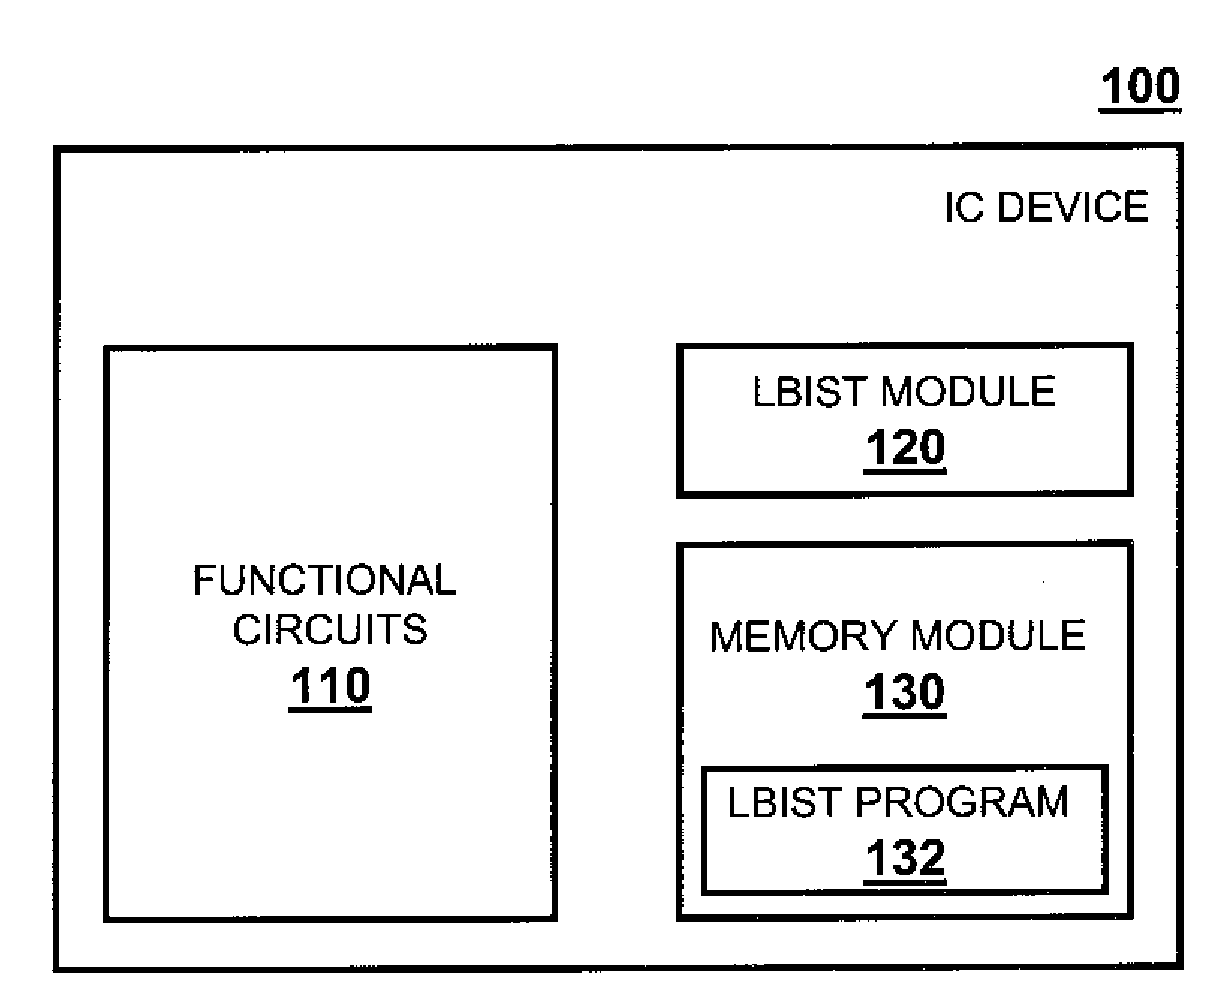 Techniques for Logic Built-In Self-Test Diagnostics of Integrated Circuit Devices